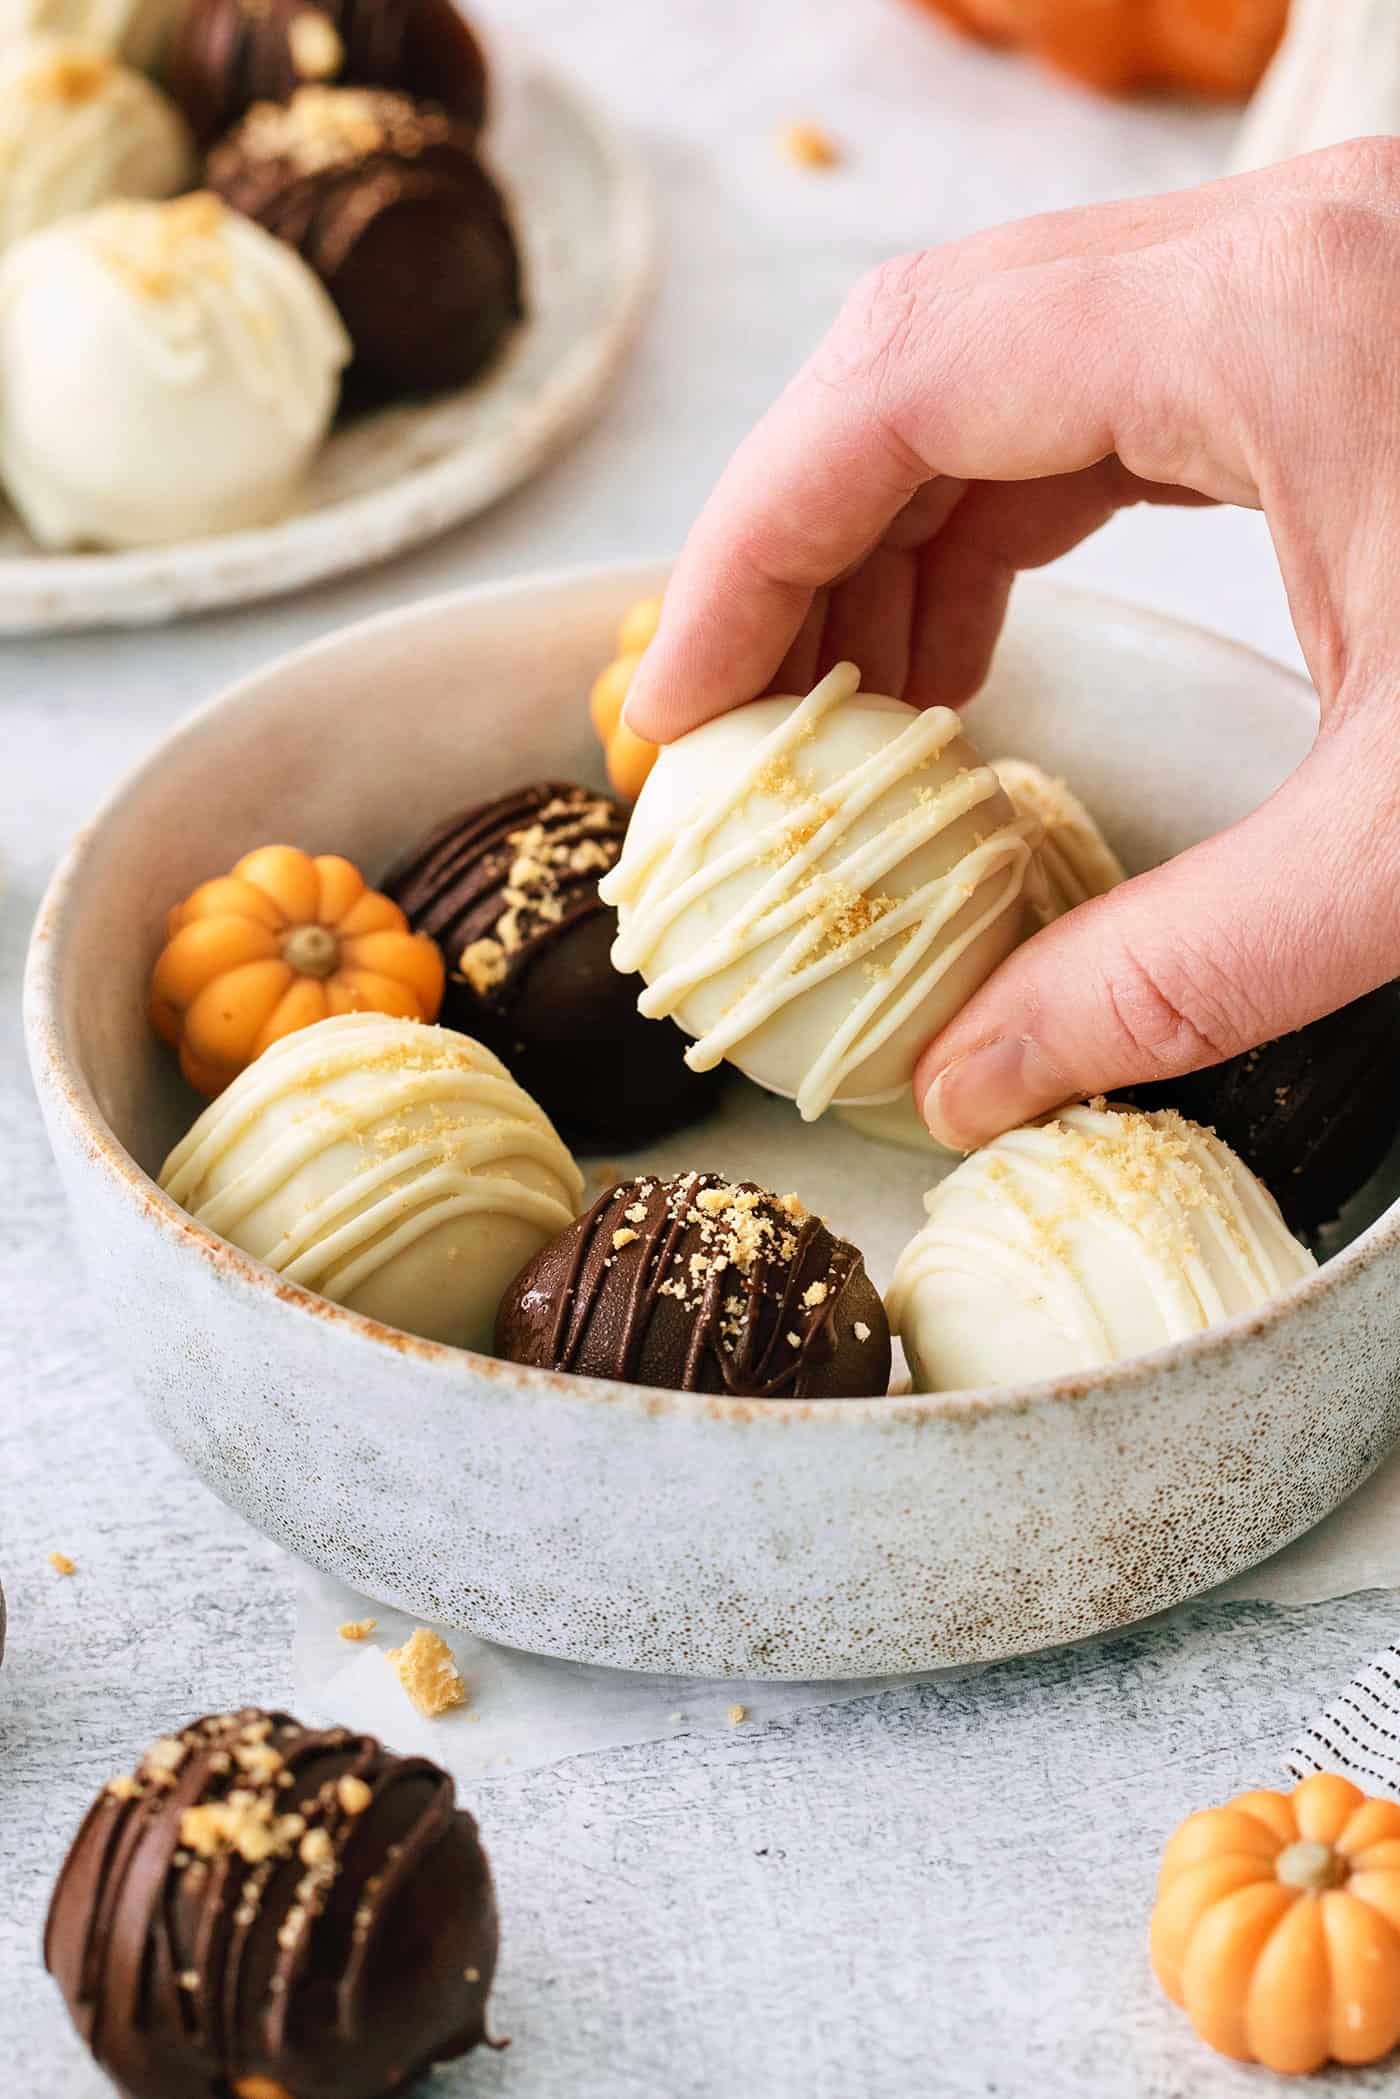 A hand picks up a white chocolate covered pumpkin pie truffle from a bowl of truffles.